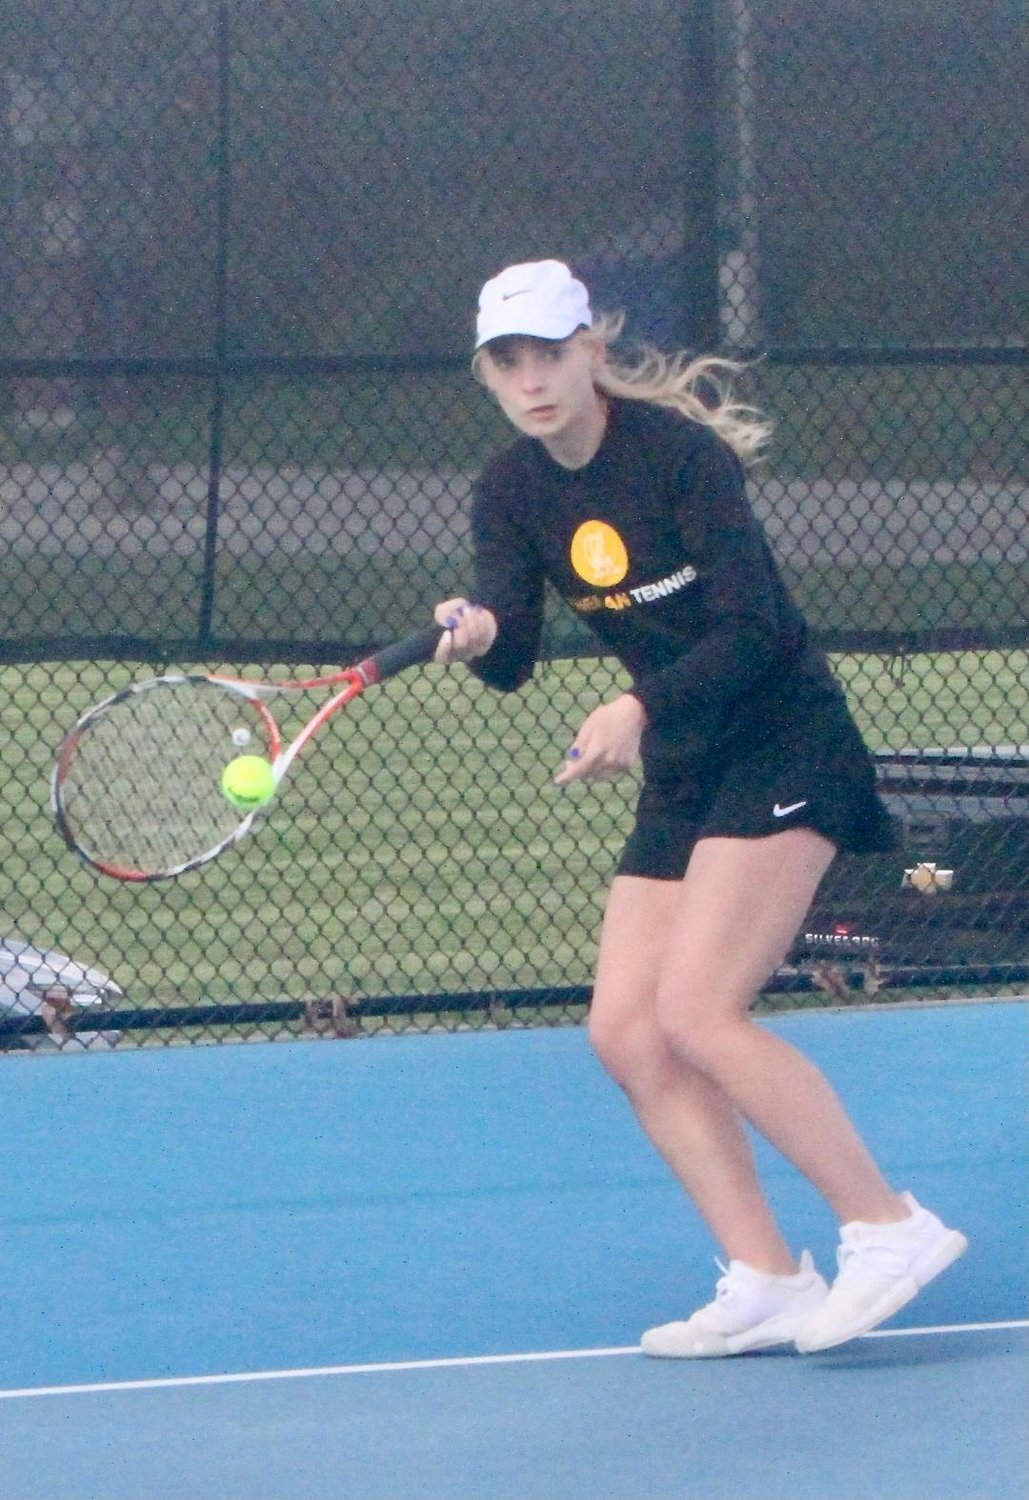 Crawfordsville senior Lauren Hale helped the Athenians defeat North Montgomery with a win at No. 1 singles.